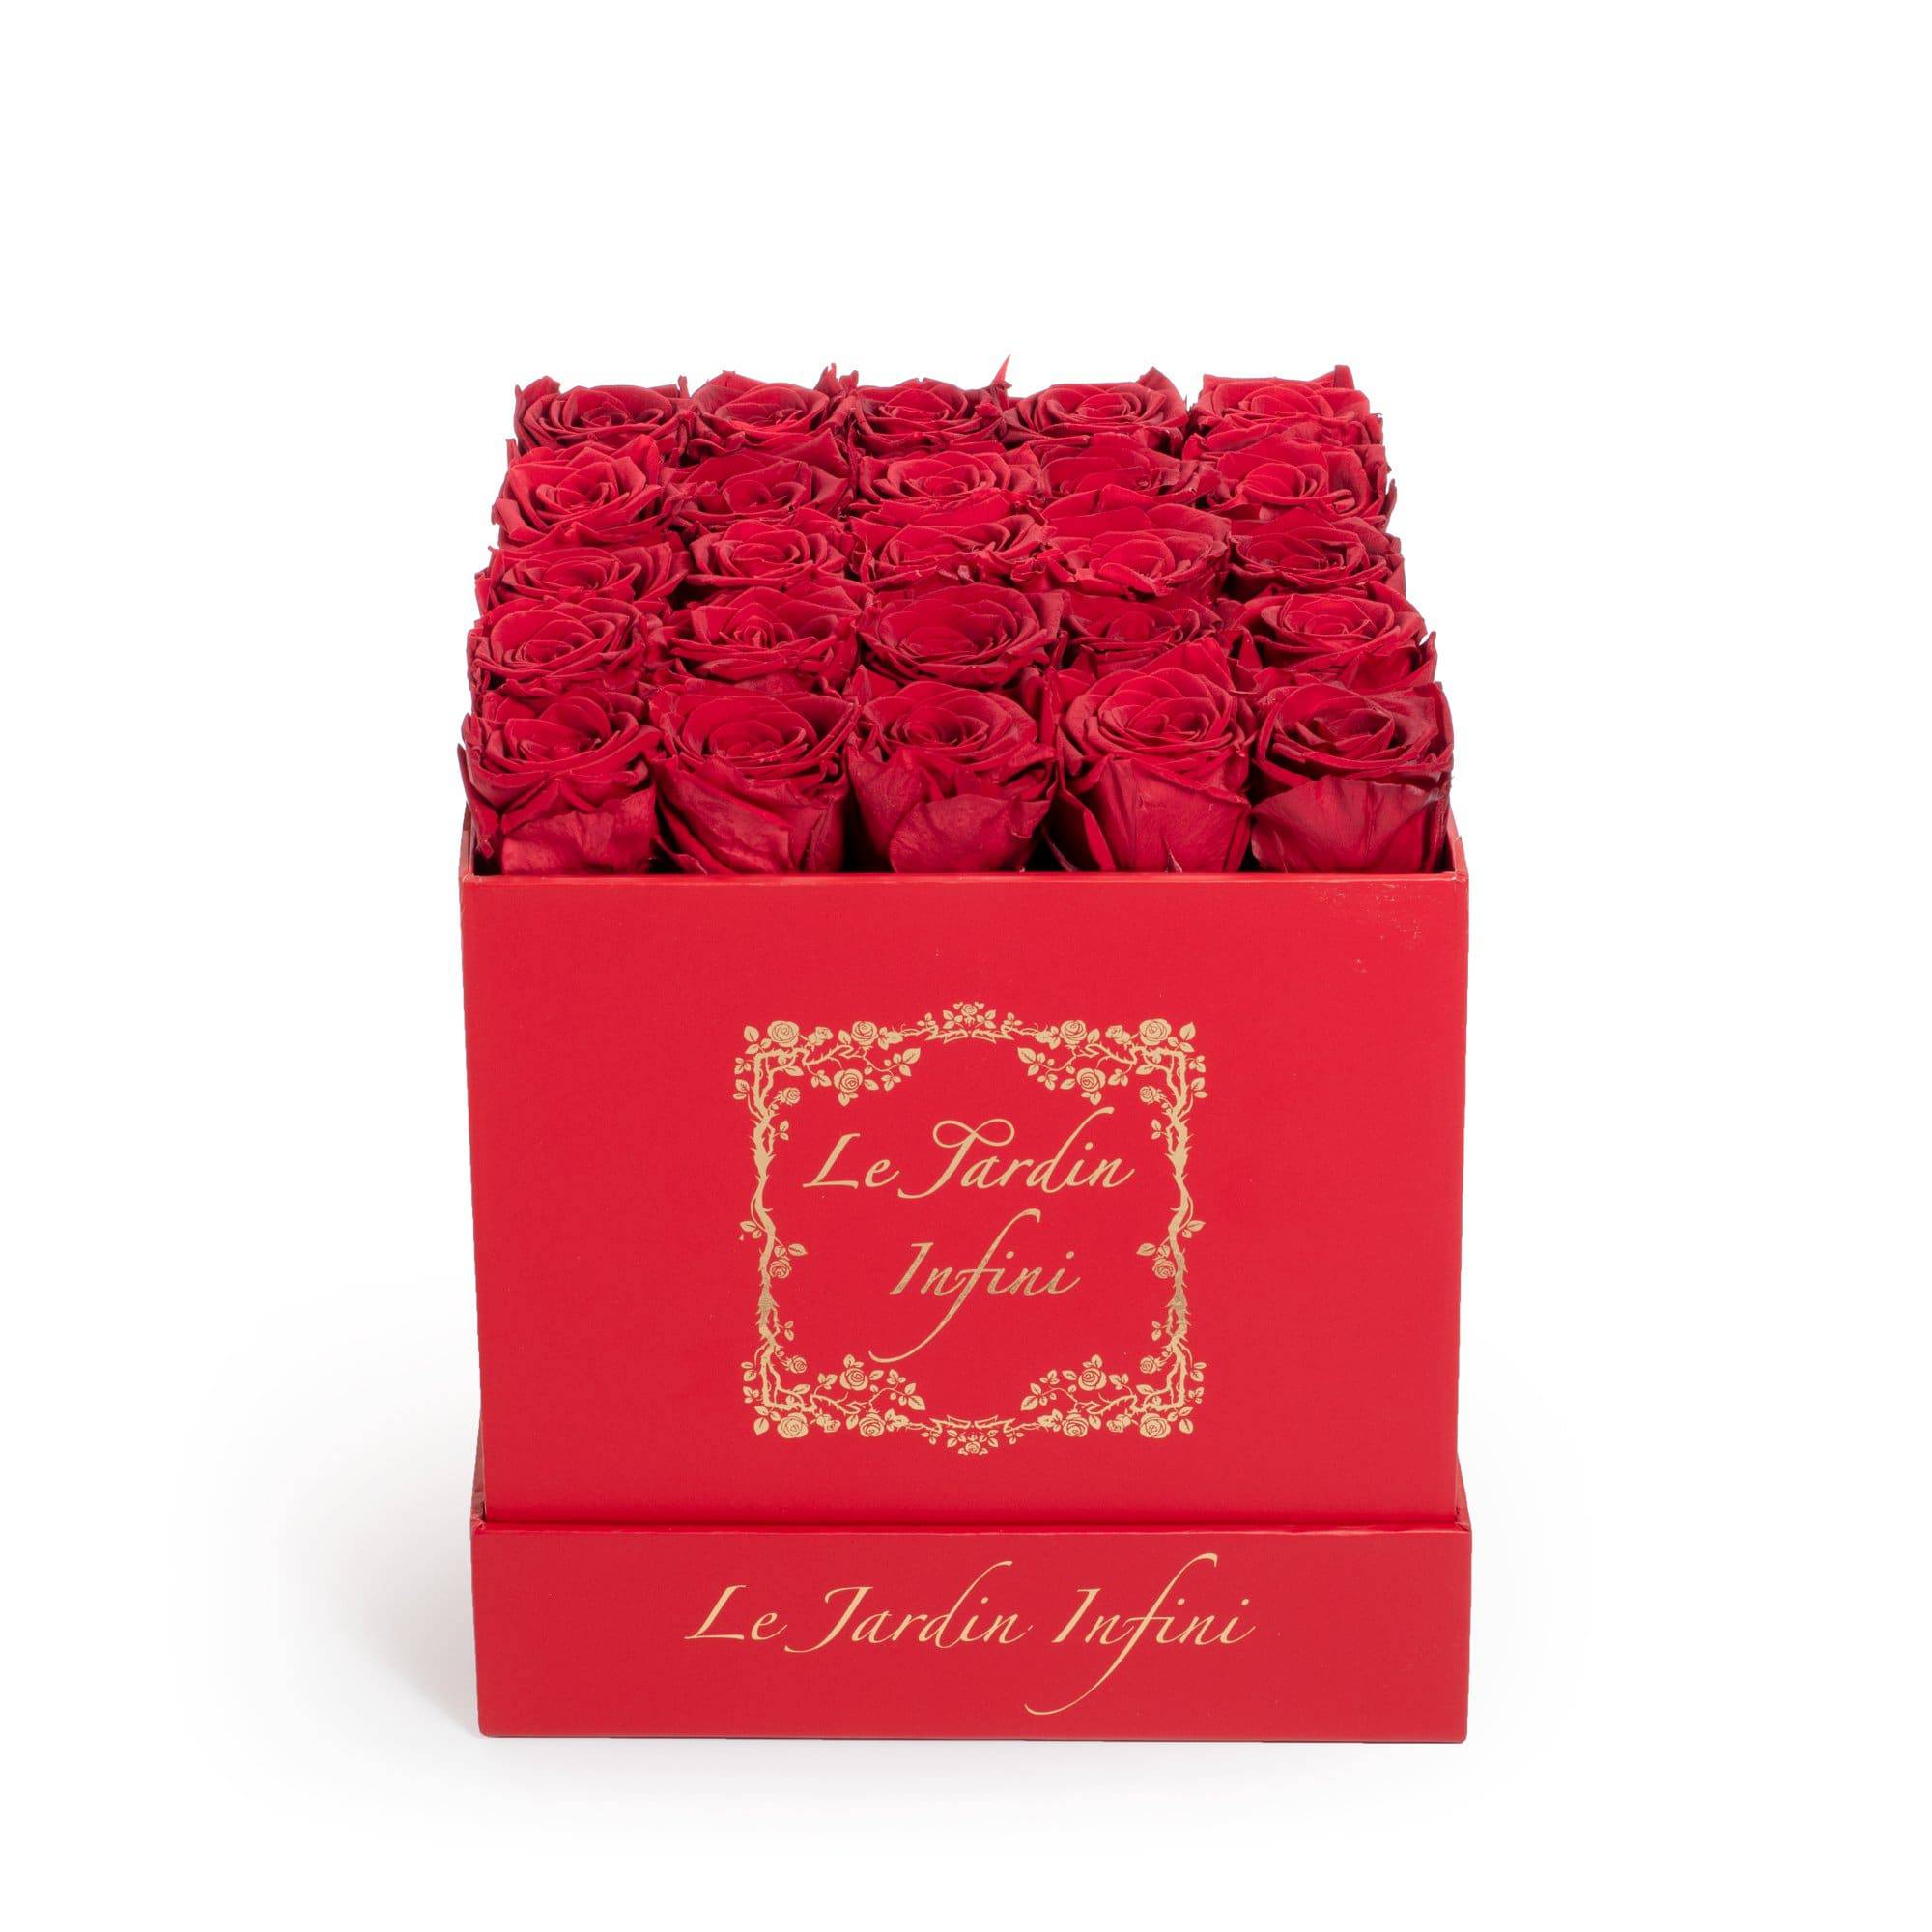 Red Preserved Roses - Medium Square Red Box - Le Jardin Infini Roses in a Box